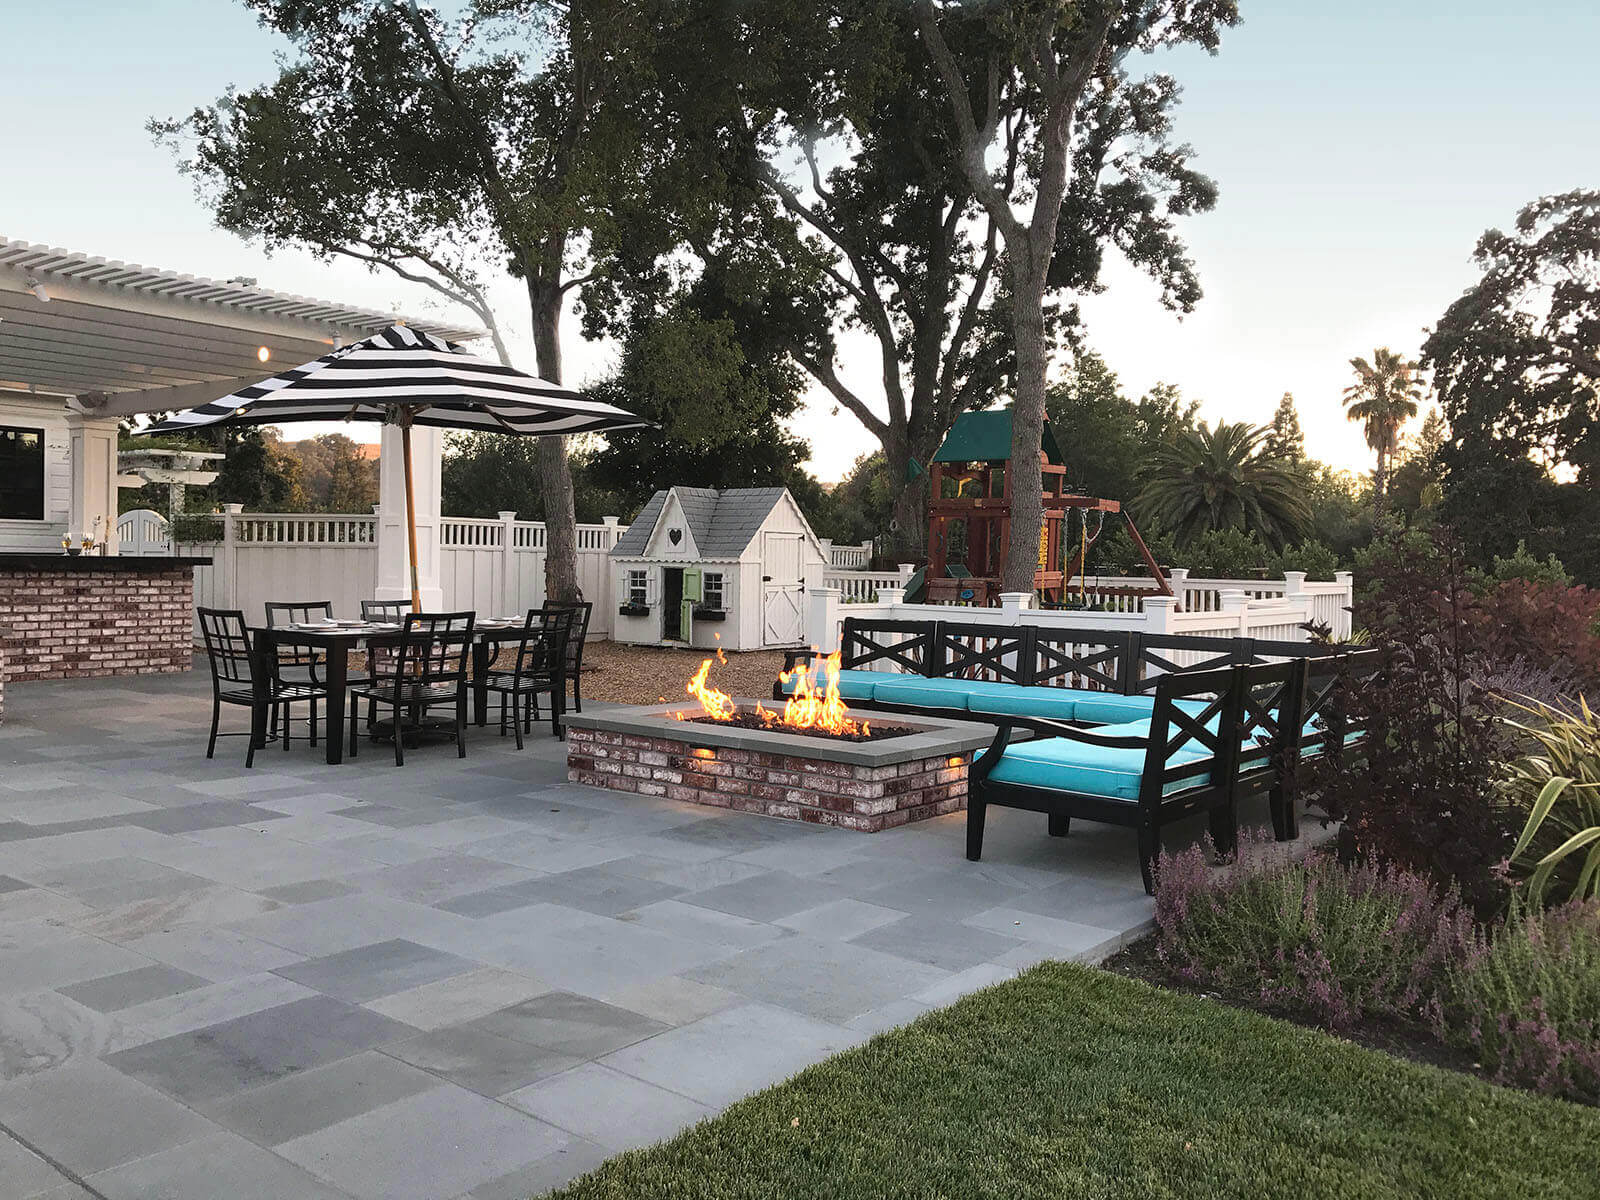 Contemporary bluestone patio with wrap seating surrounding rectangular firepit